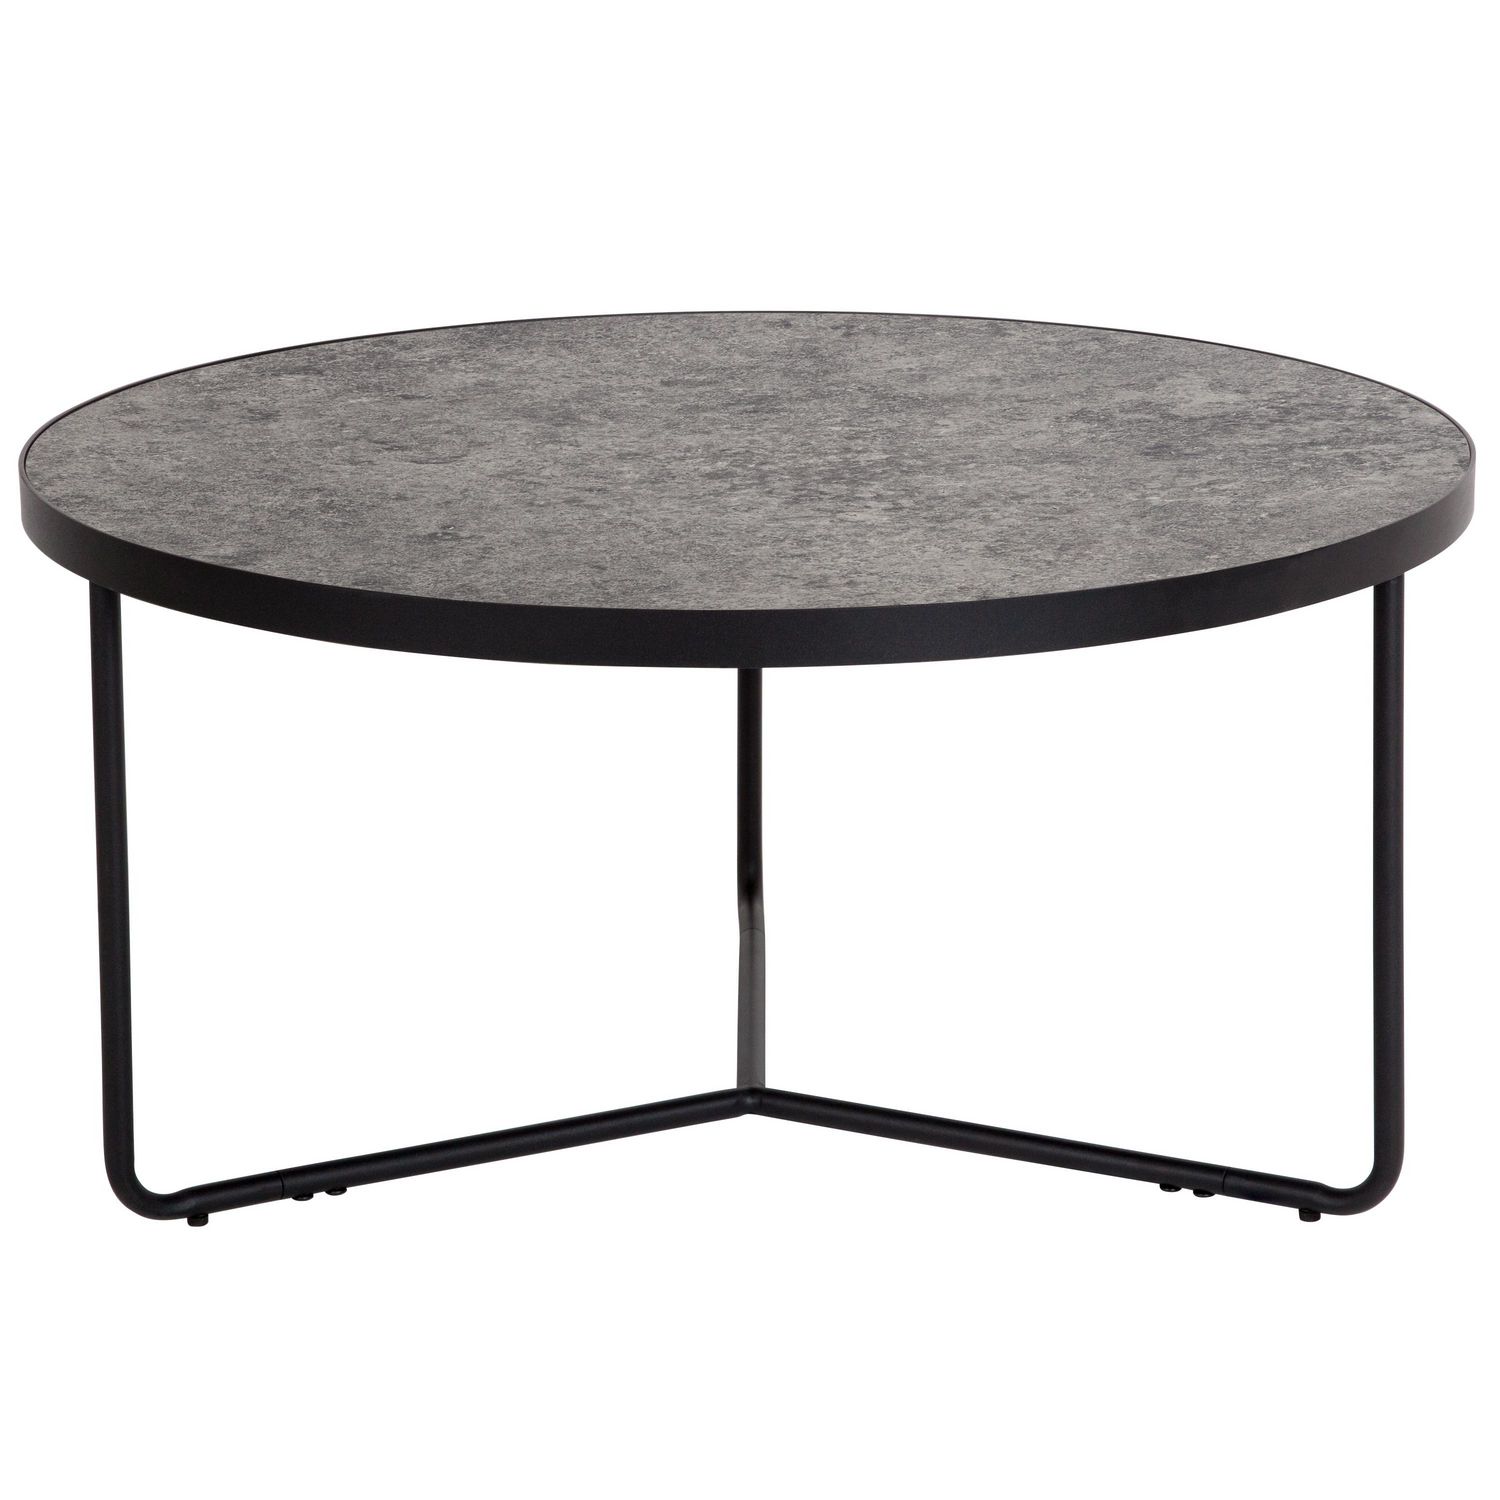 Go back Symposium Attentive Providence Collection 31.5" Round Coffee Table in Concrete Finish | Walmart  Canada